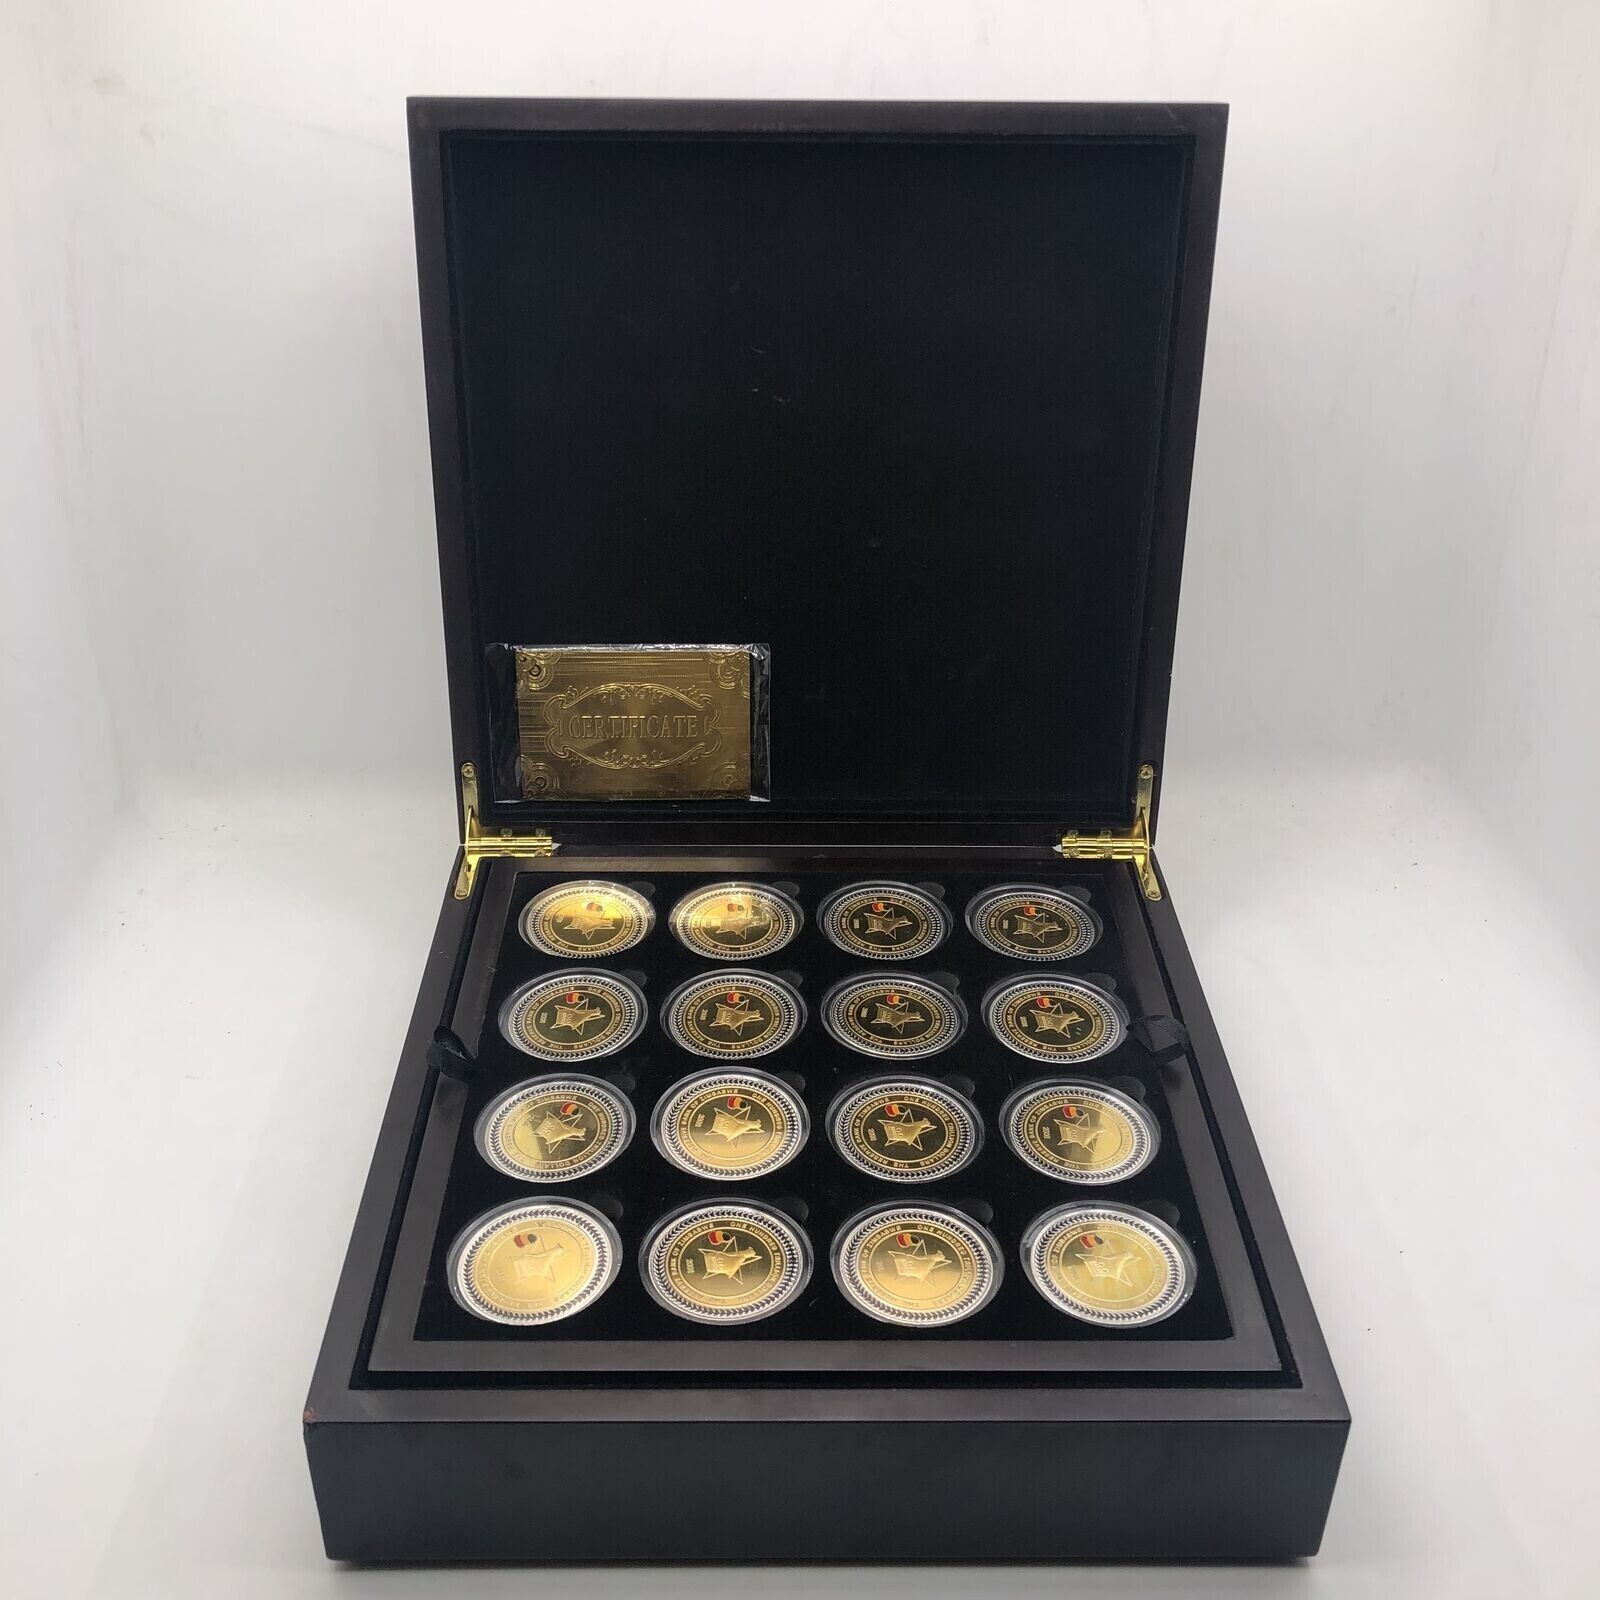 64pcs/box 2008 Zimbabwe One Hundred Trillion Coin Medal Gold plated Coins